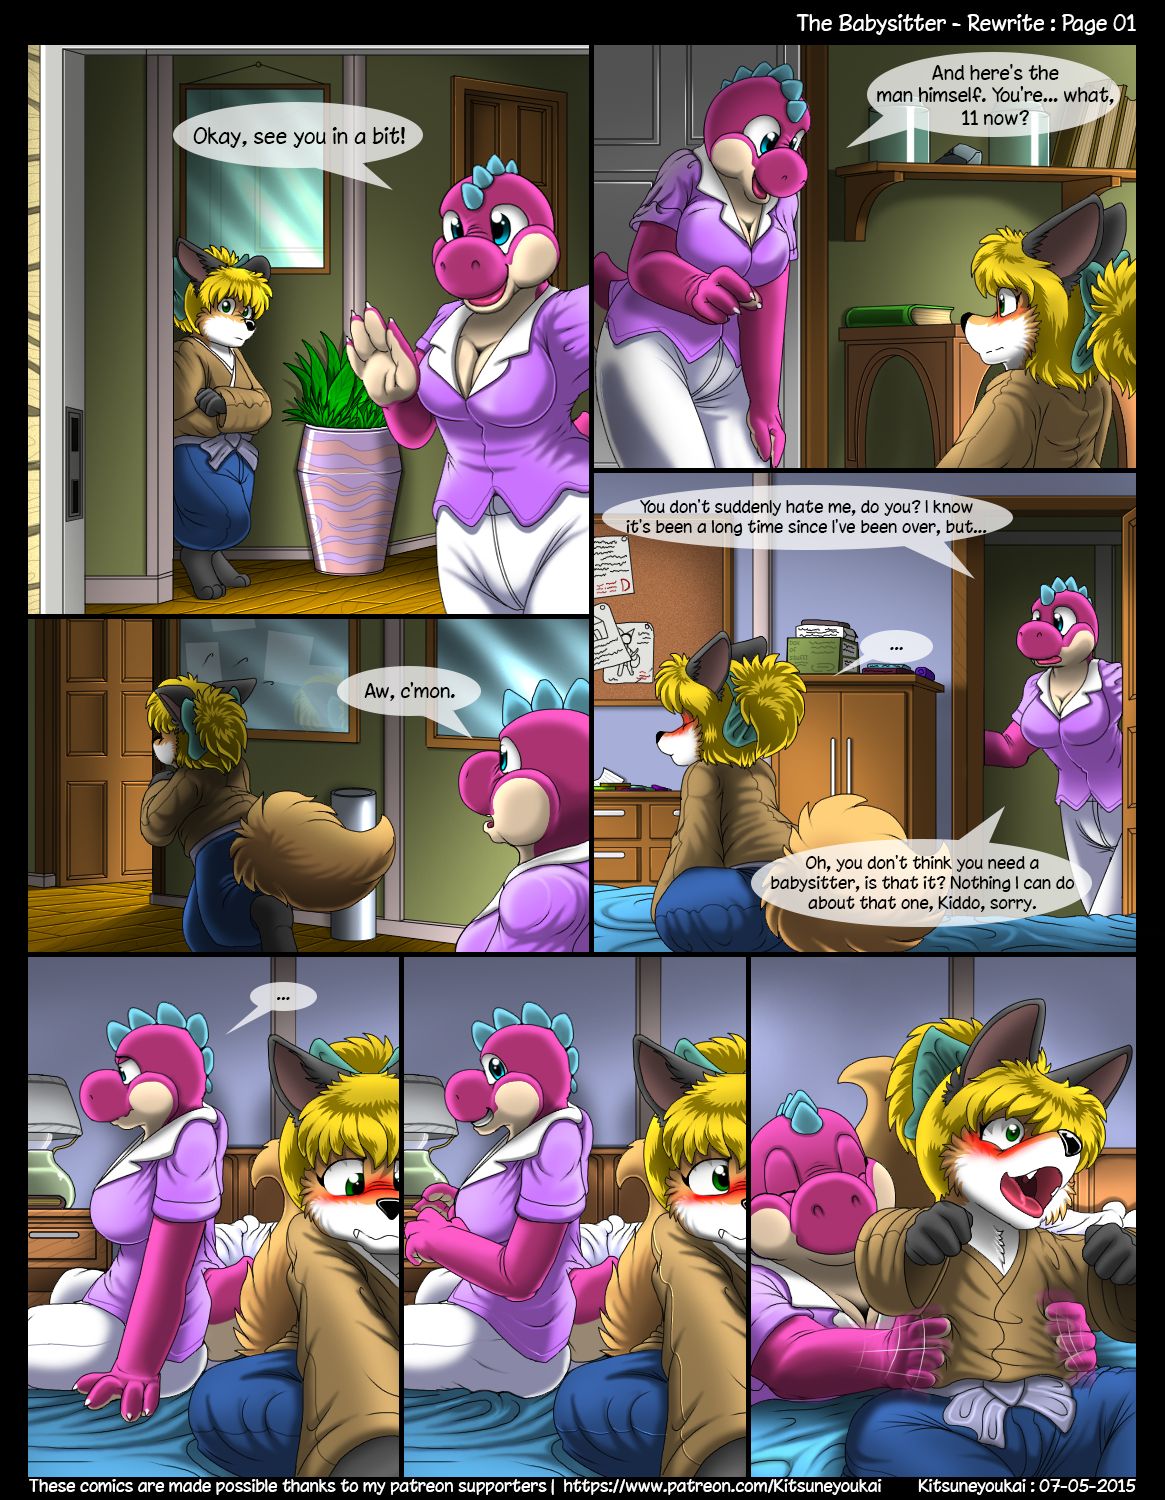 The baby sitter furry porn comic